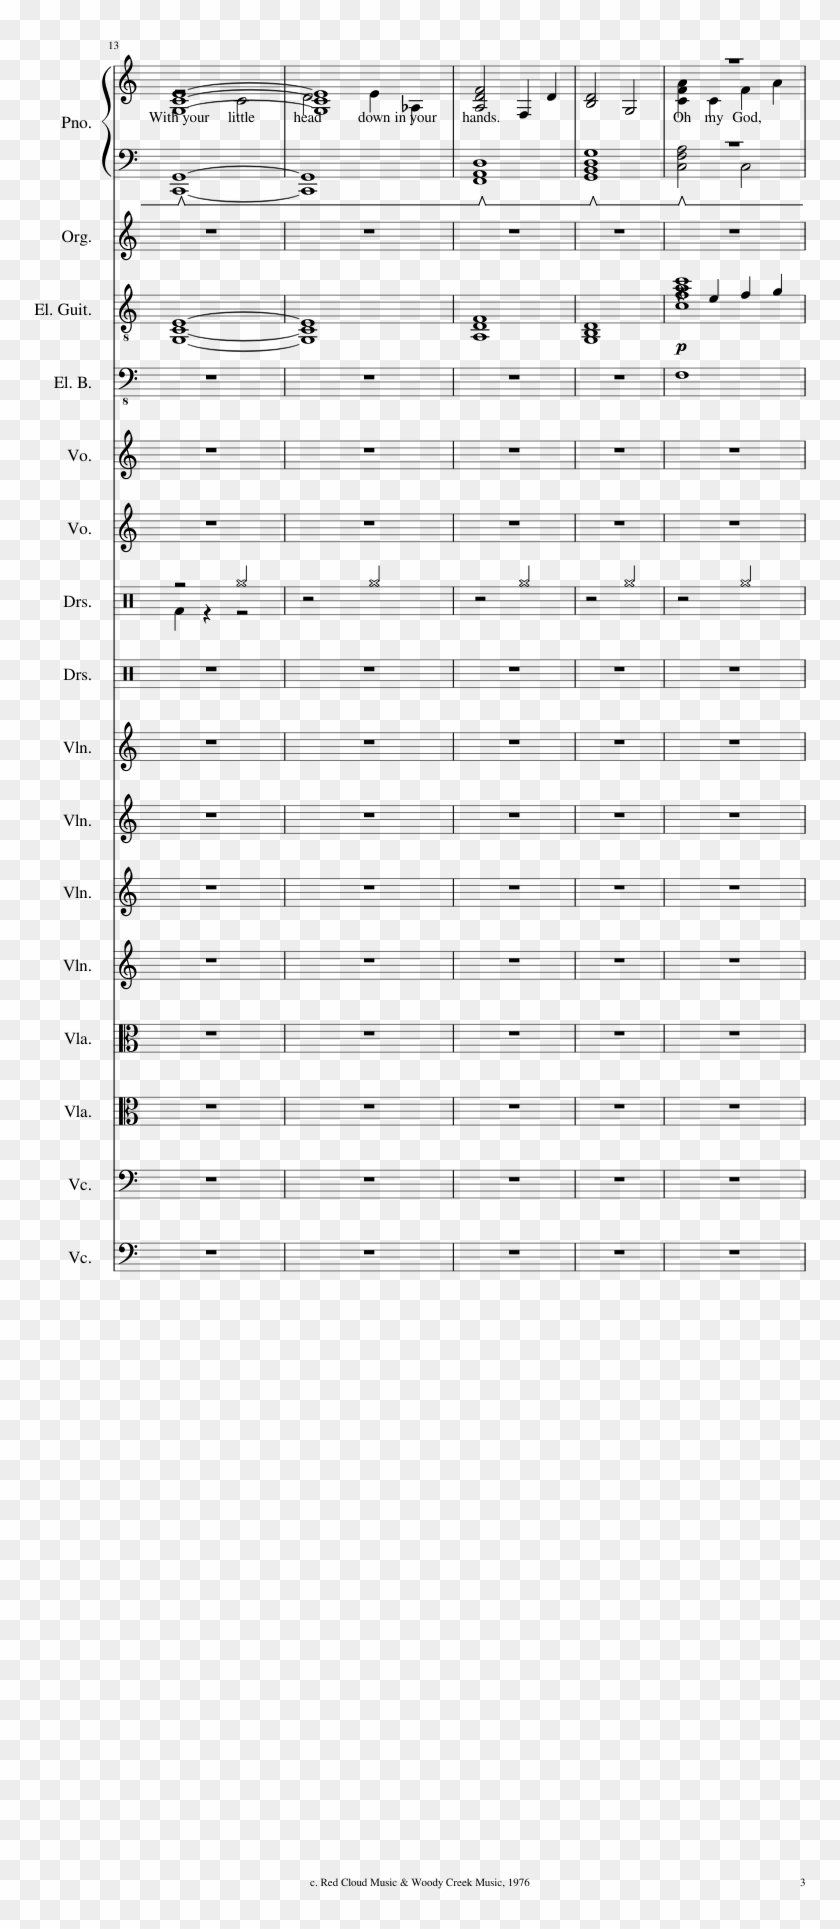 Wasted Time Sheet Music Composed By Words And Music - Colorfulness Clipart #1783963